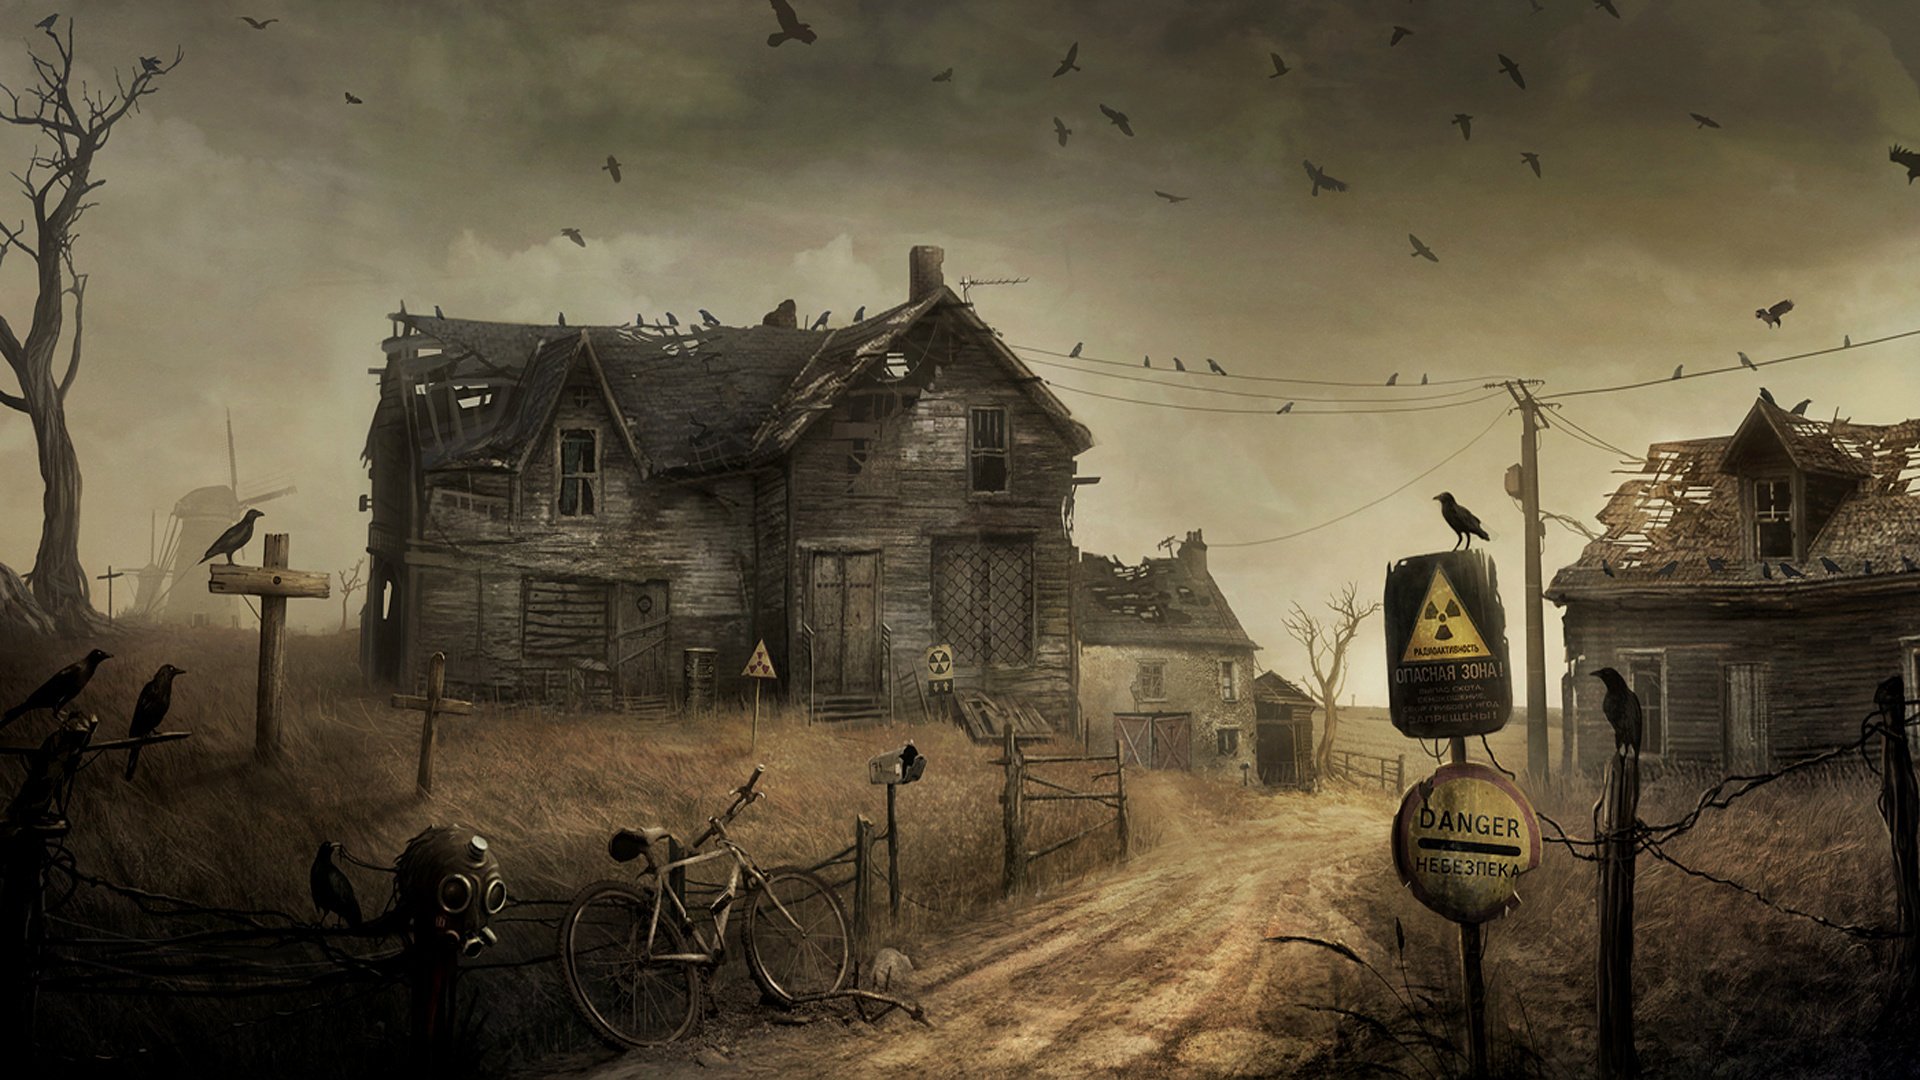  halloween birds crows ravens bicycle houses haunted destruction